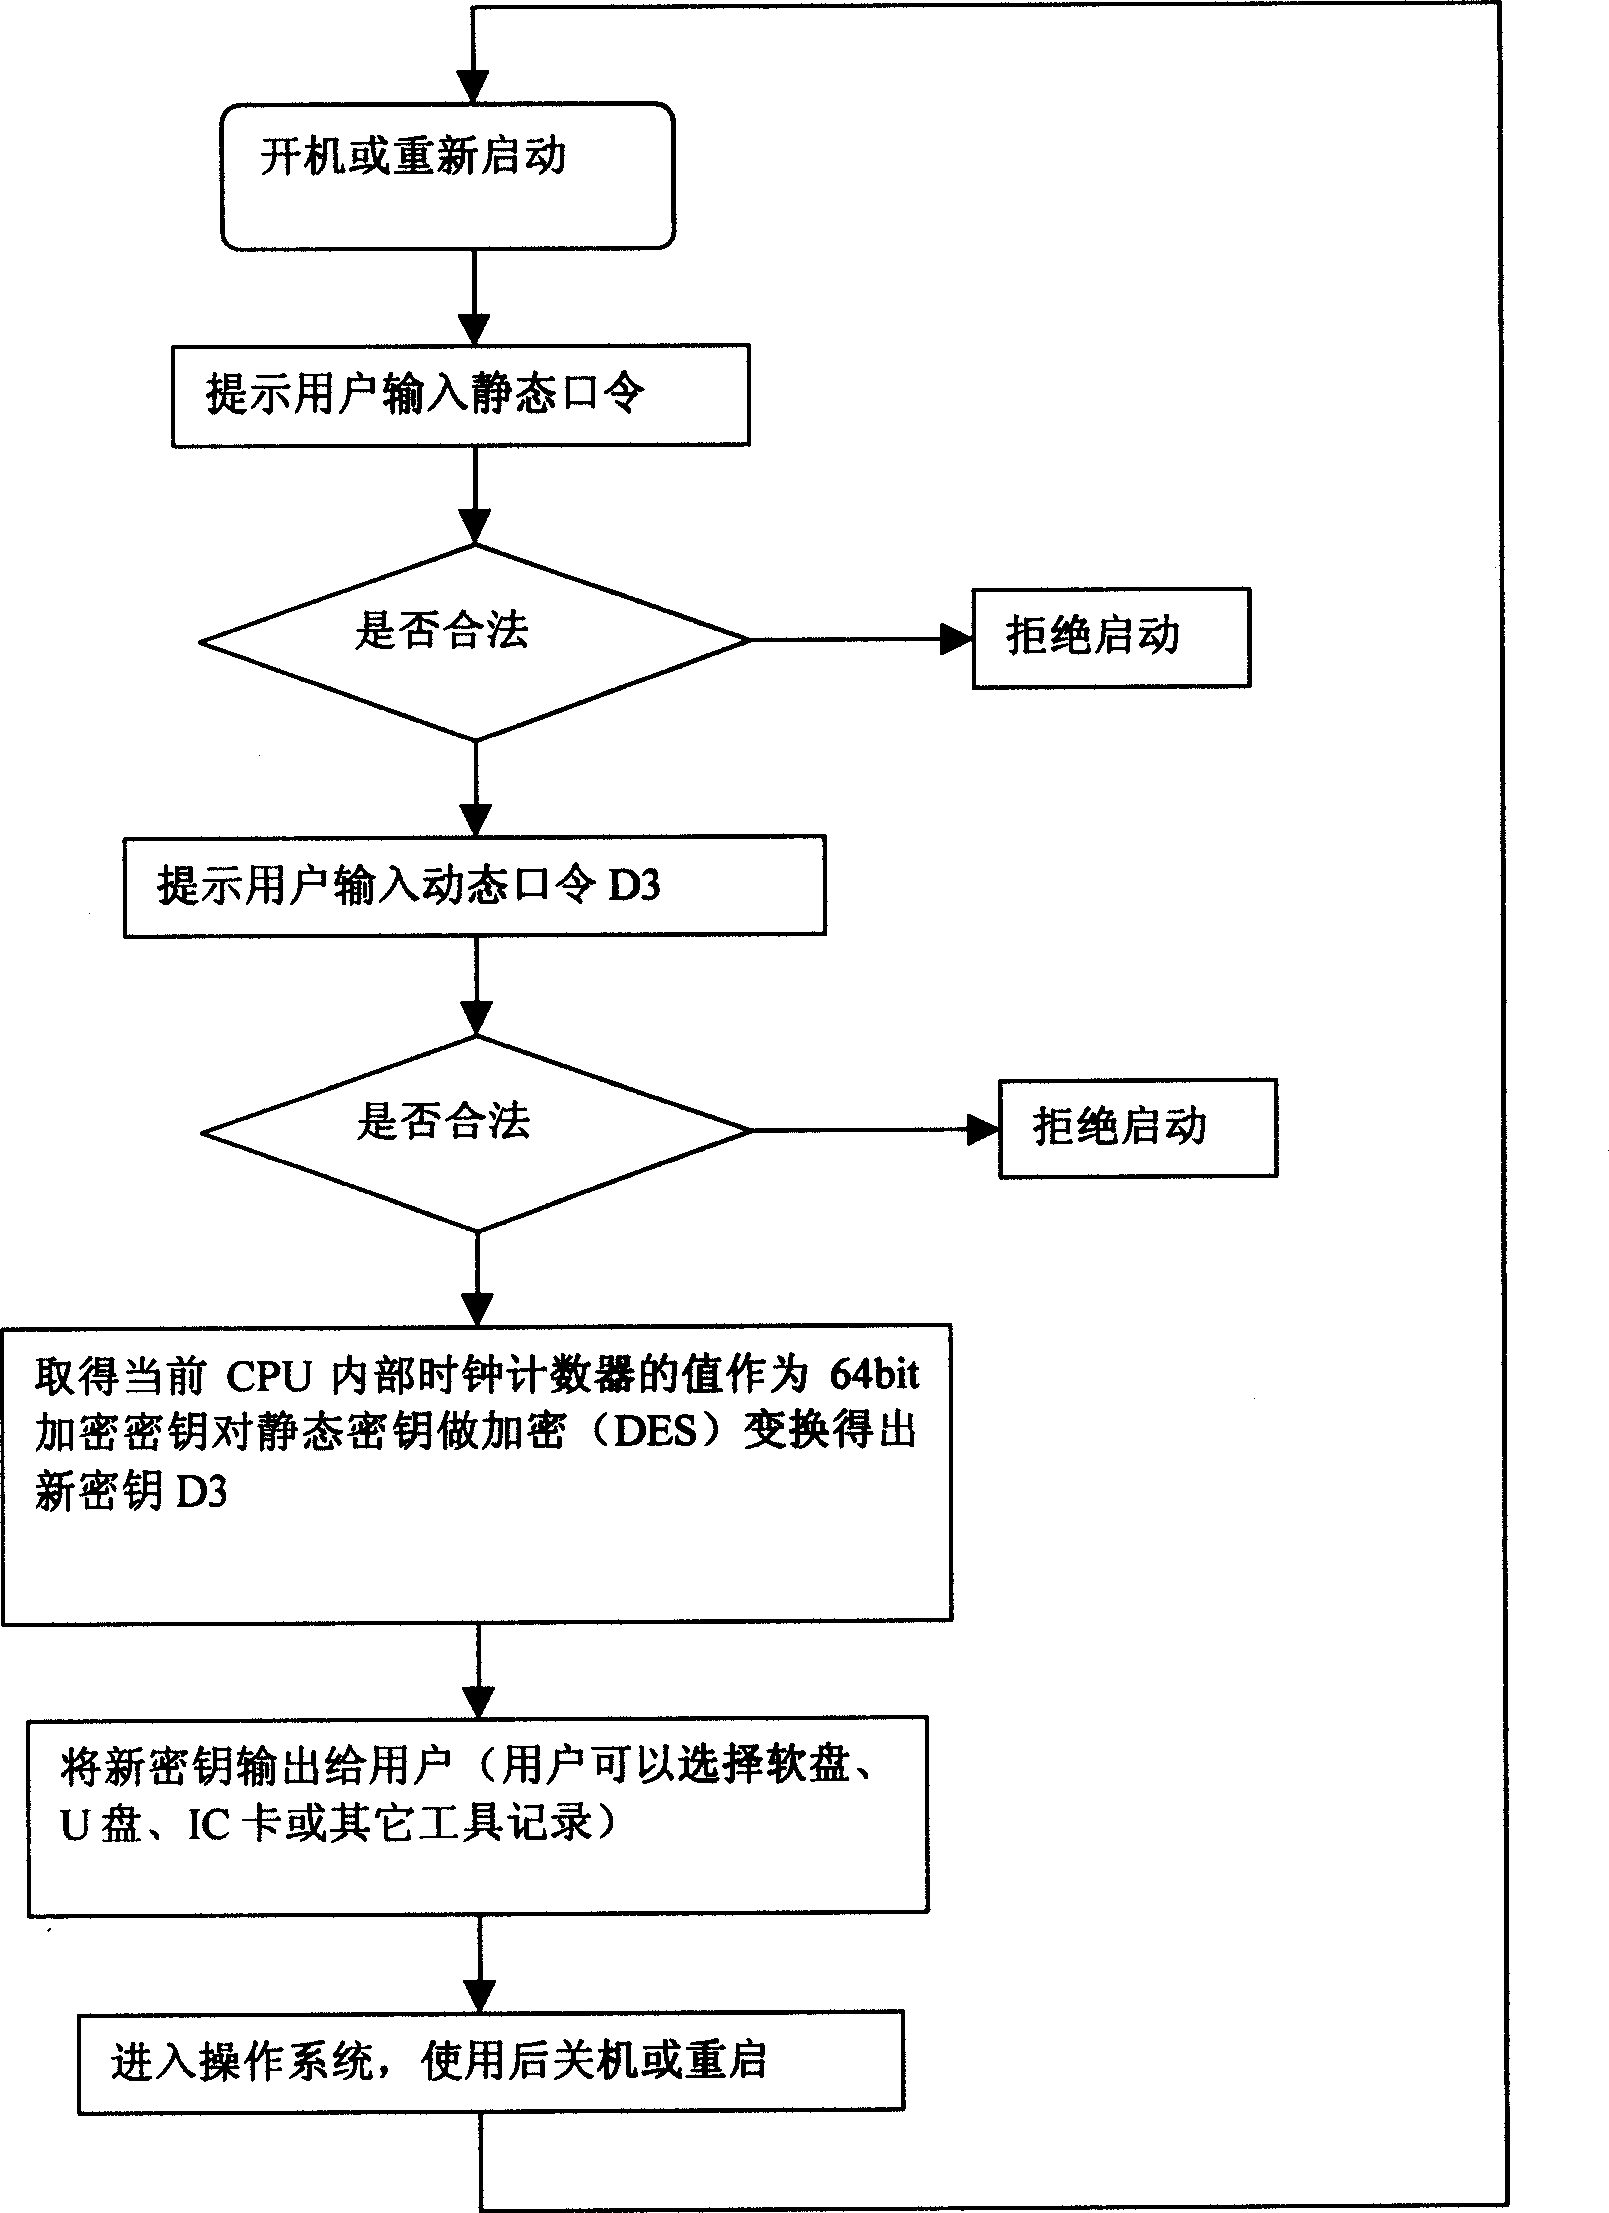 Method and device for realizing computer safety and enciphering based on identity confirmation